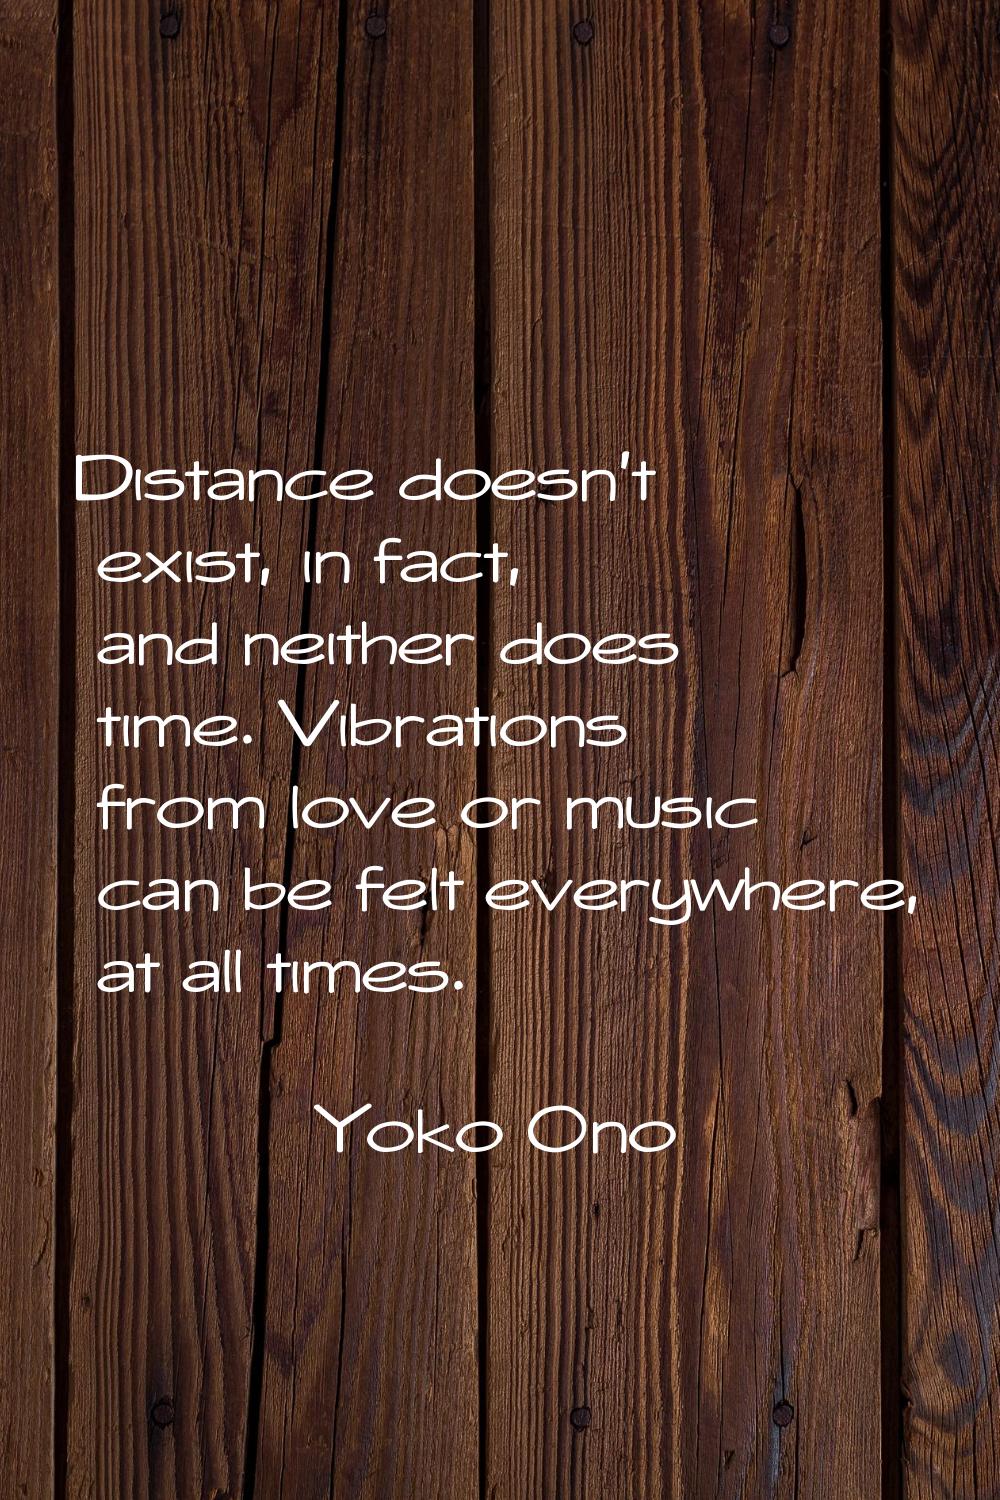 Distance doesn't exist, in fact, and neither does time. Vibrations from love or music can be felt e